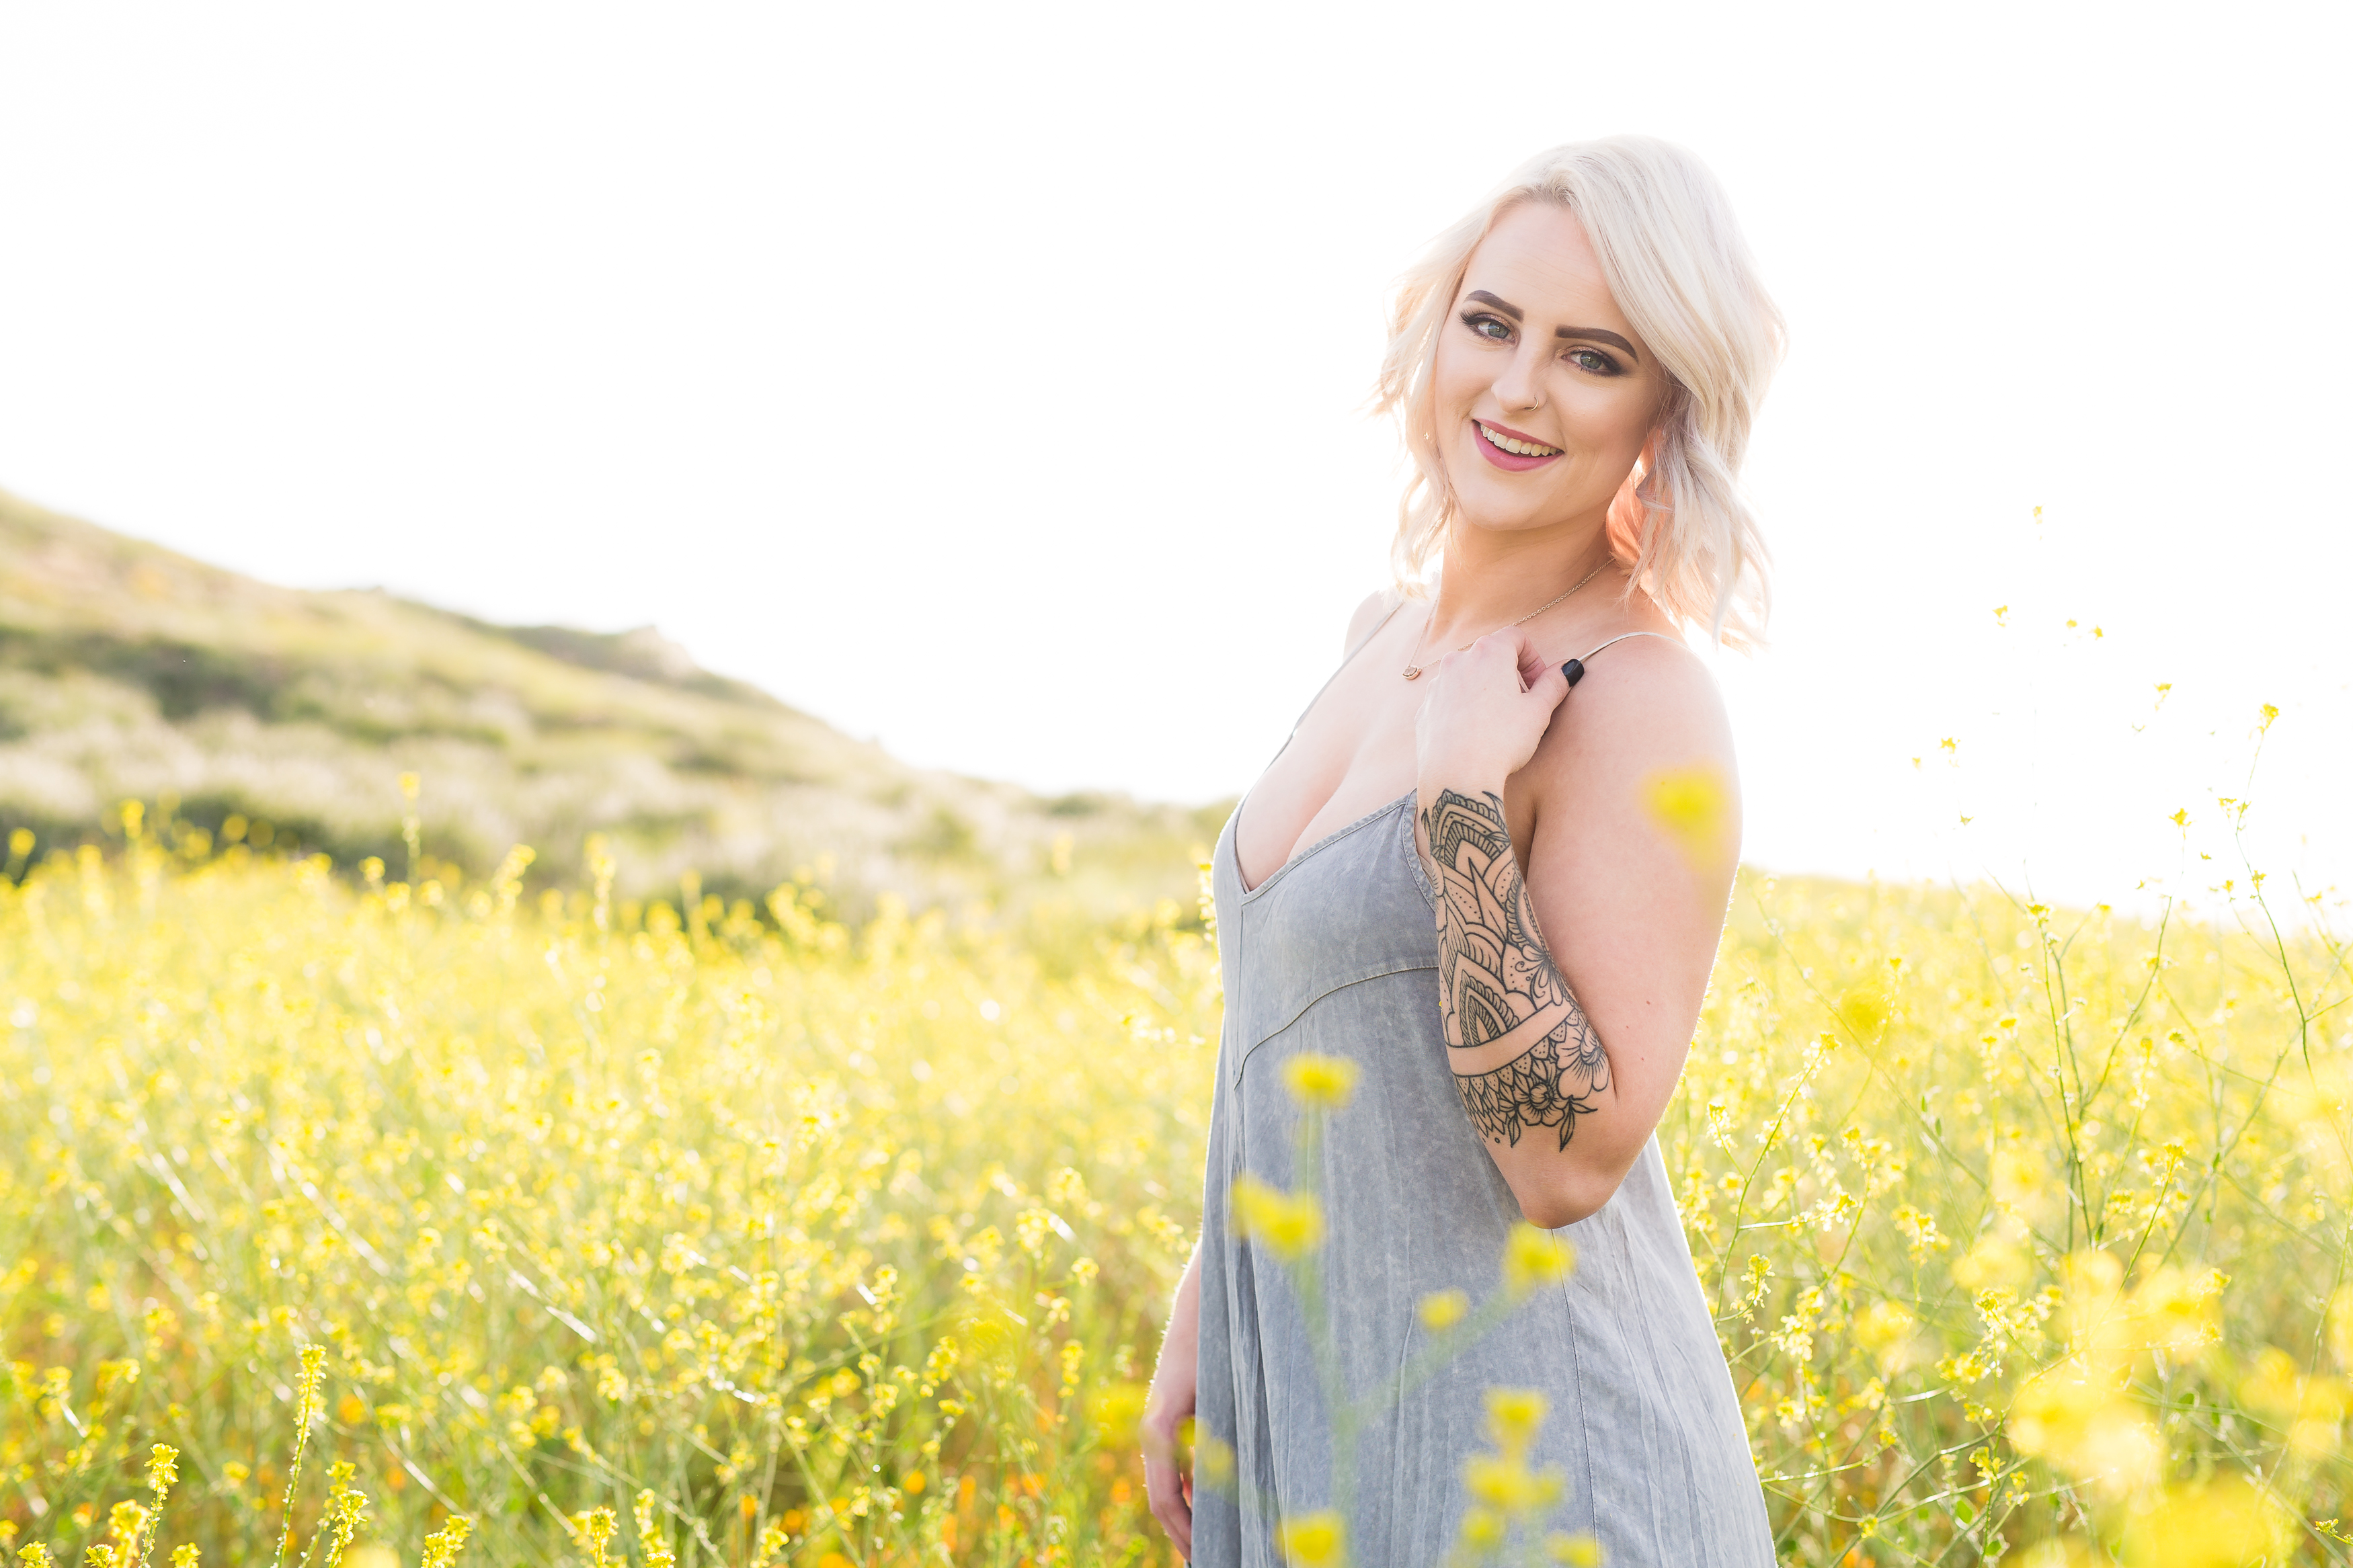 Blonde model standing holding dress strap amidst yellow flowers